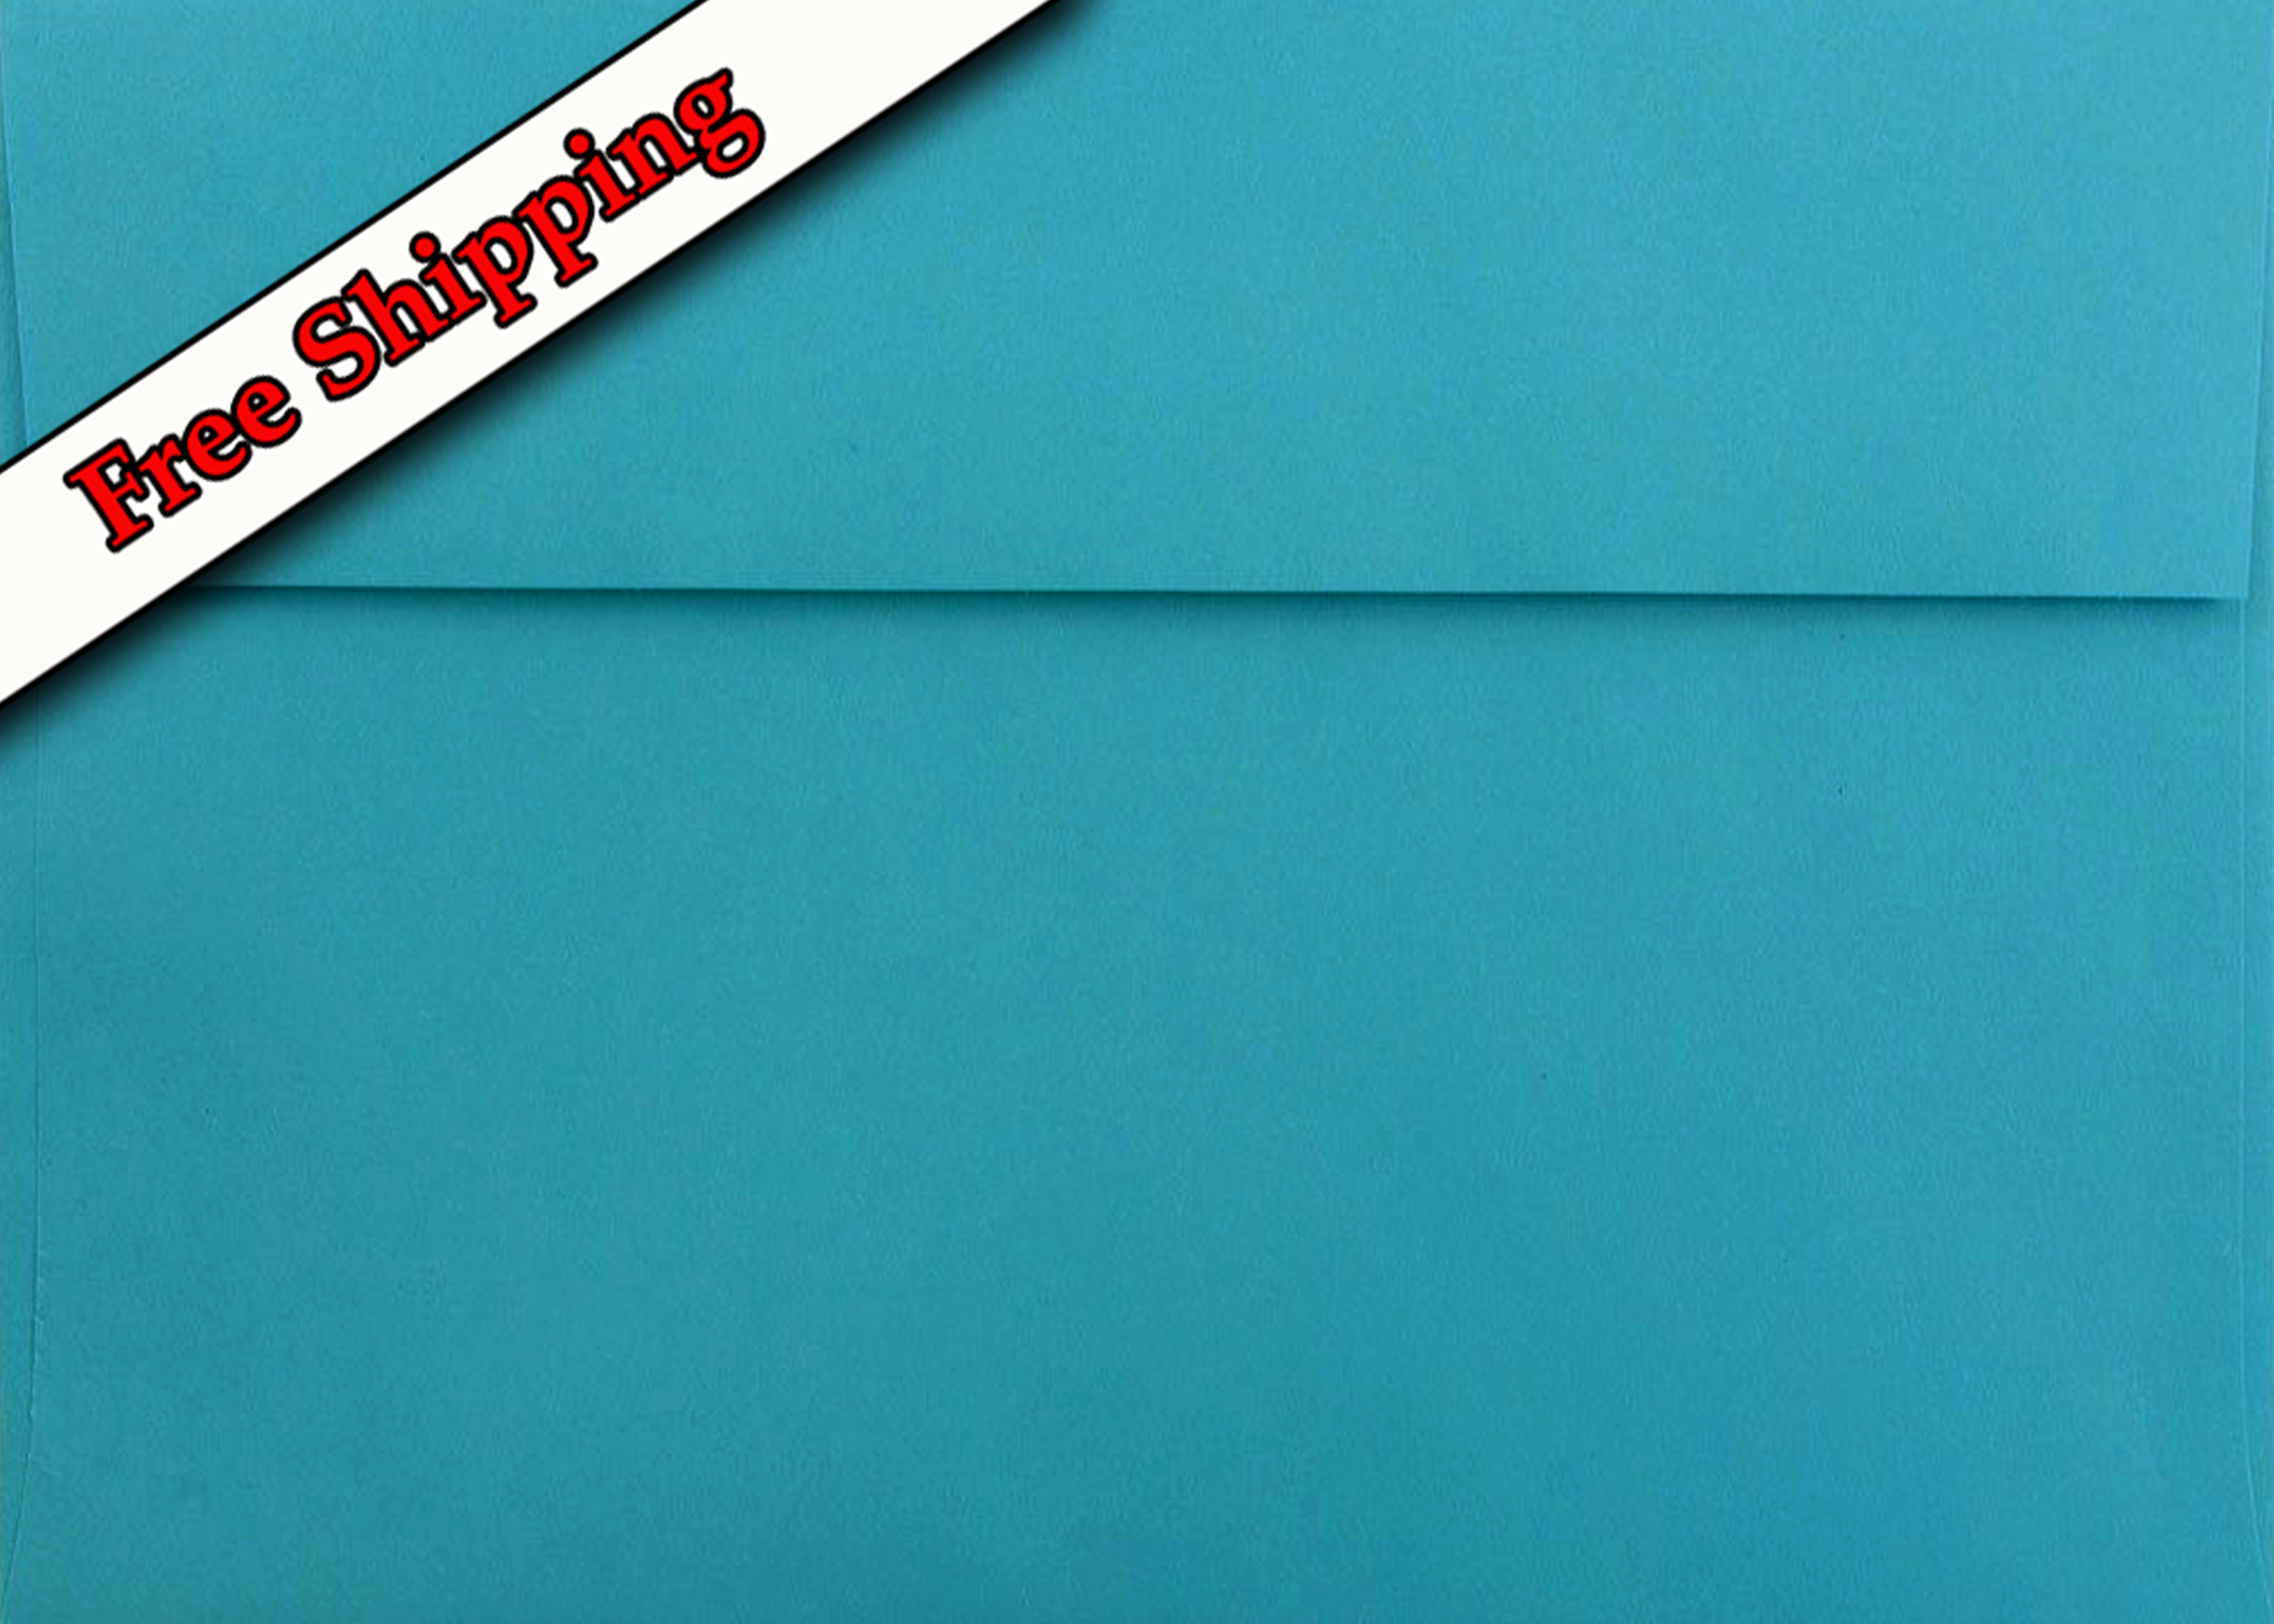 Teal / Aqua 25 Pack A7 Envelopes (5.25 x 7.25) for 5 x 7 Cards, Invitations, Announcements by The Envelope Gallery - image 1 of 2